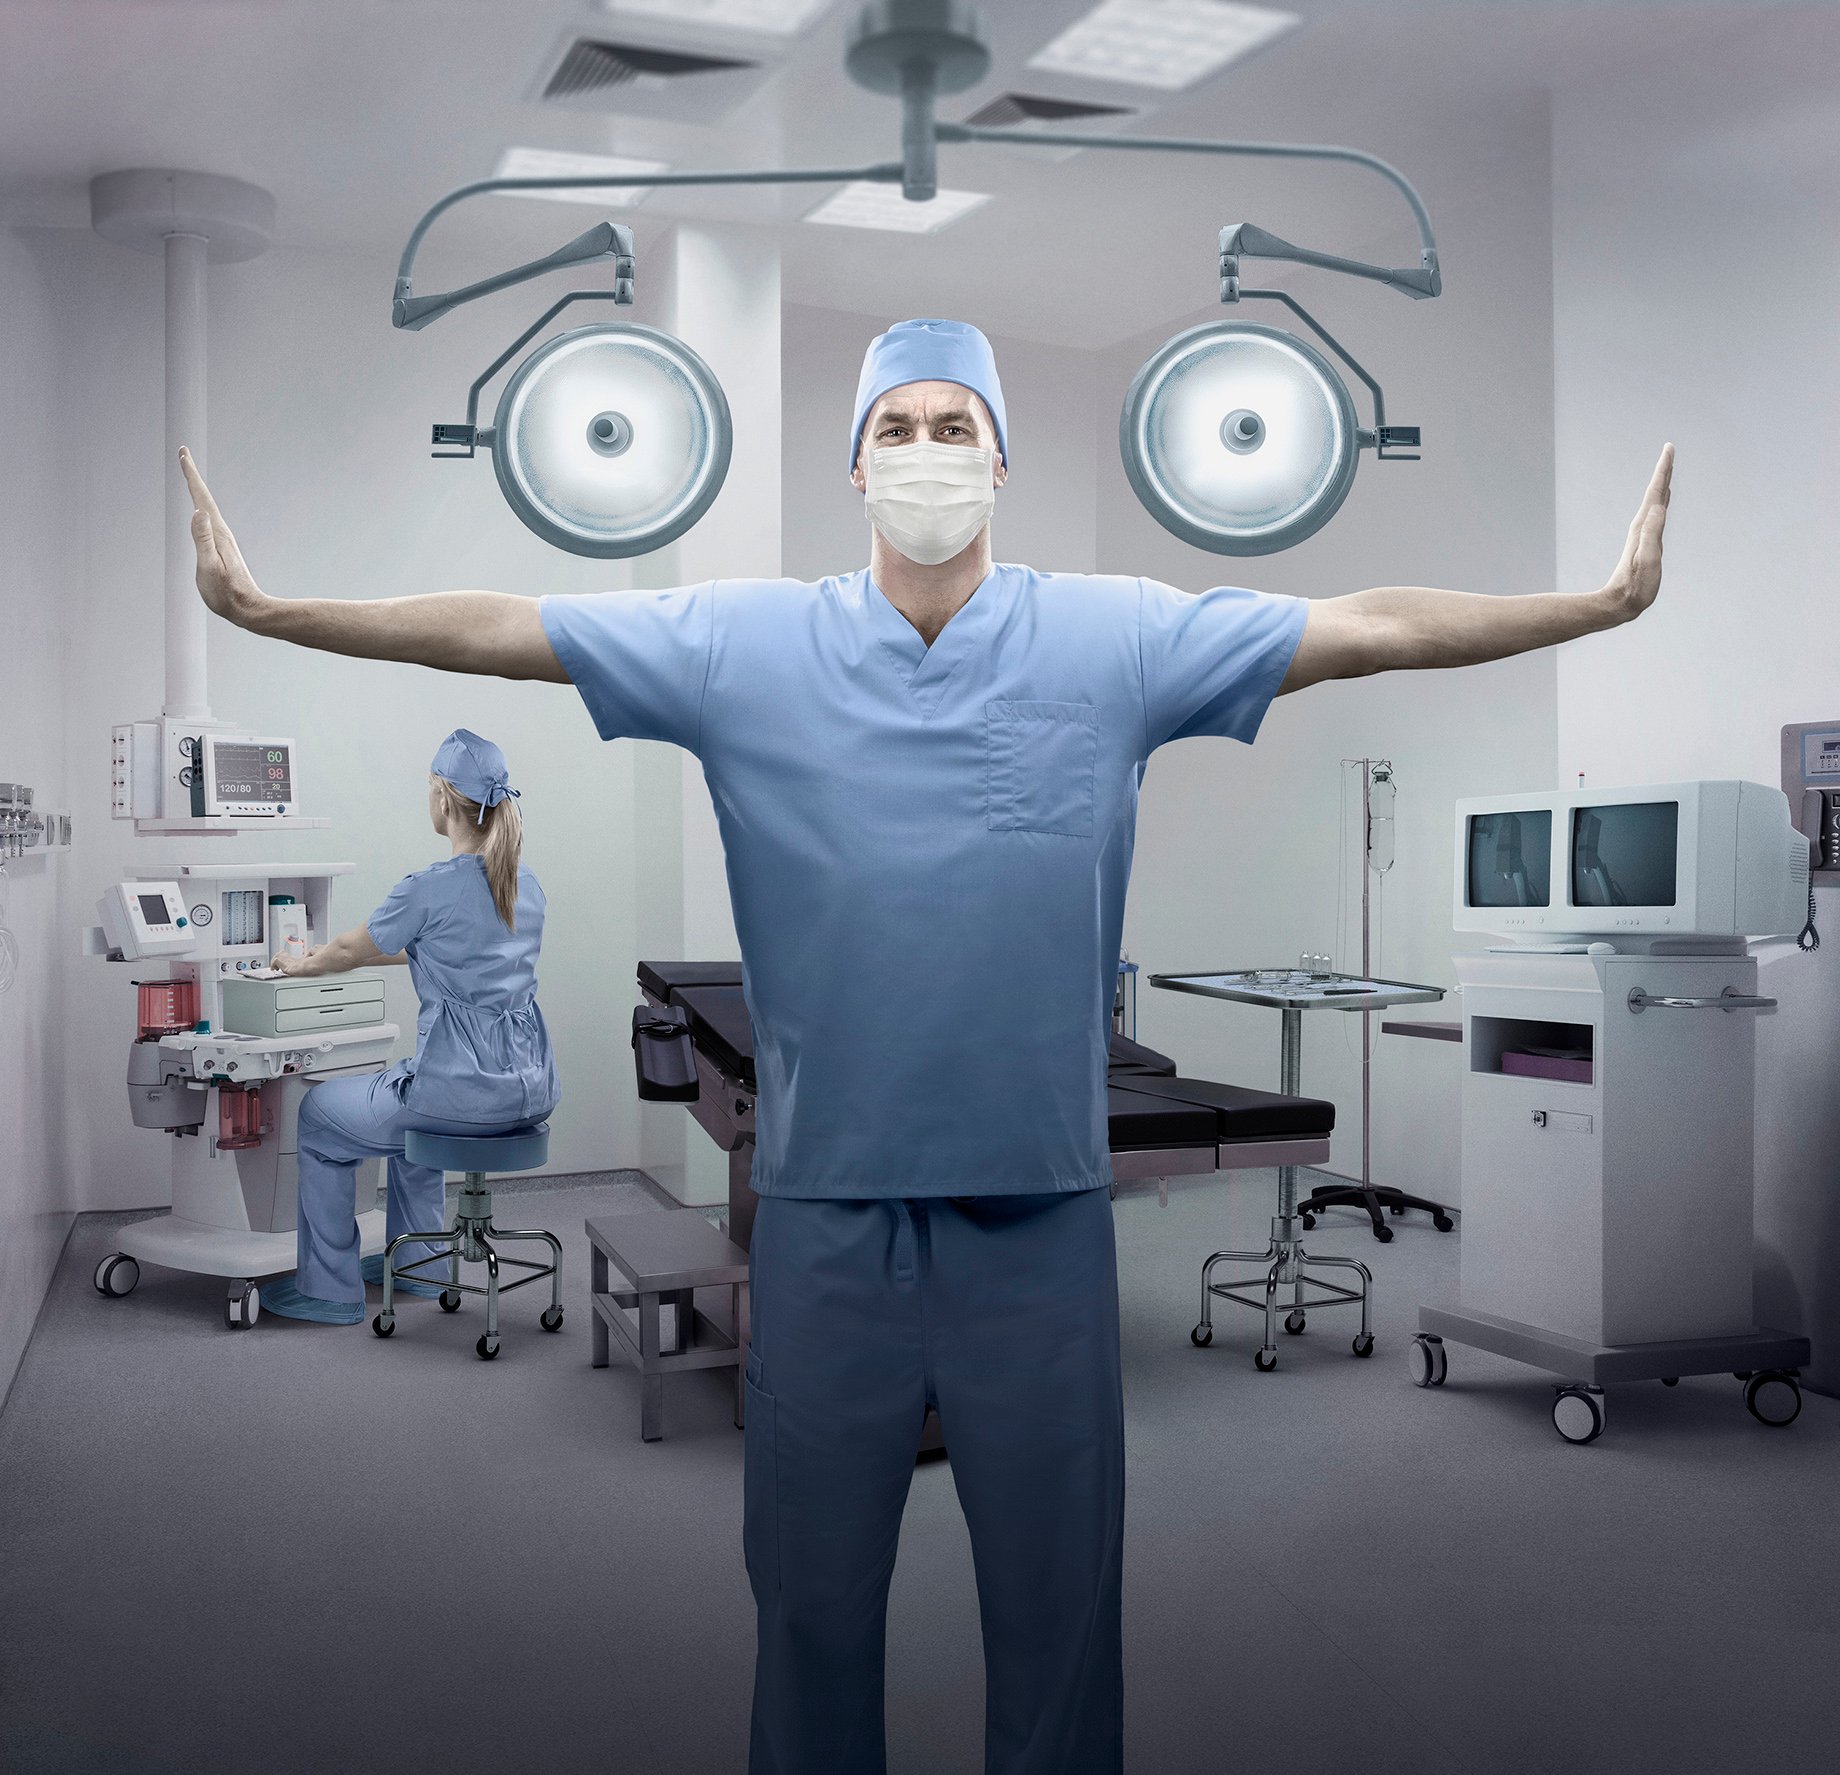 Hero image of surgeon with outstretched arms in wing shape shot by John Fulton for HondaJet Wings campaign.